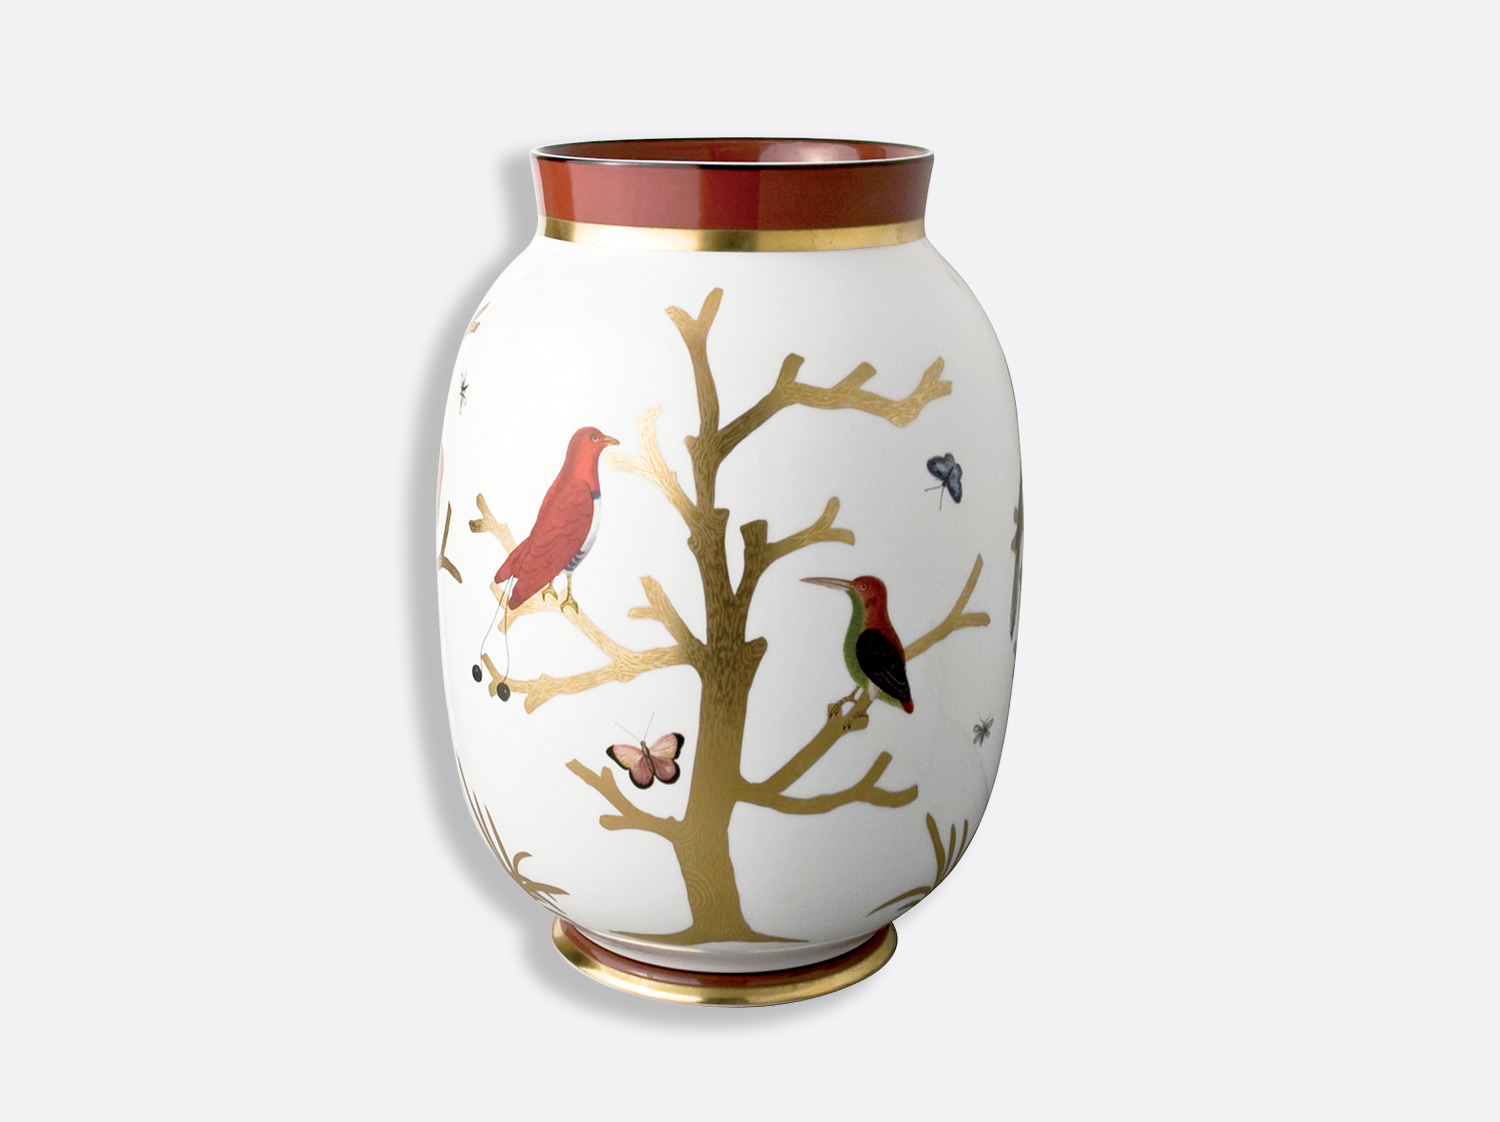 China Toscan vase 13.6" of the collection Aux oiseaux | Bernardaud